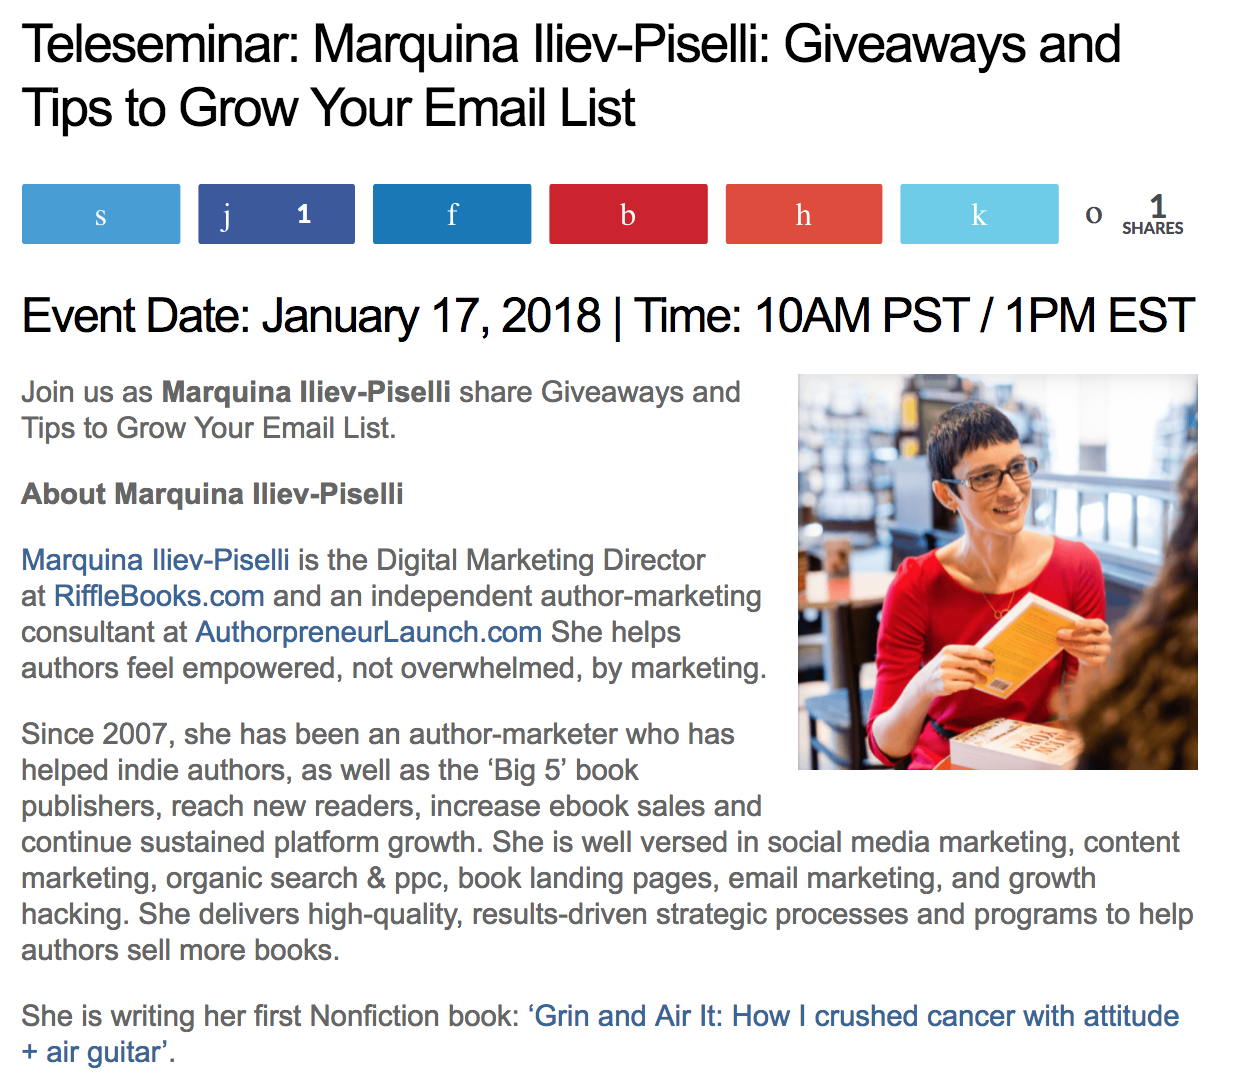 Teleseminar: Marquina Iliev-Piselli: Giveaways and Tips to Grow Your Email List